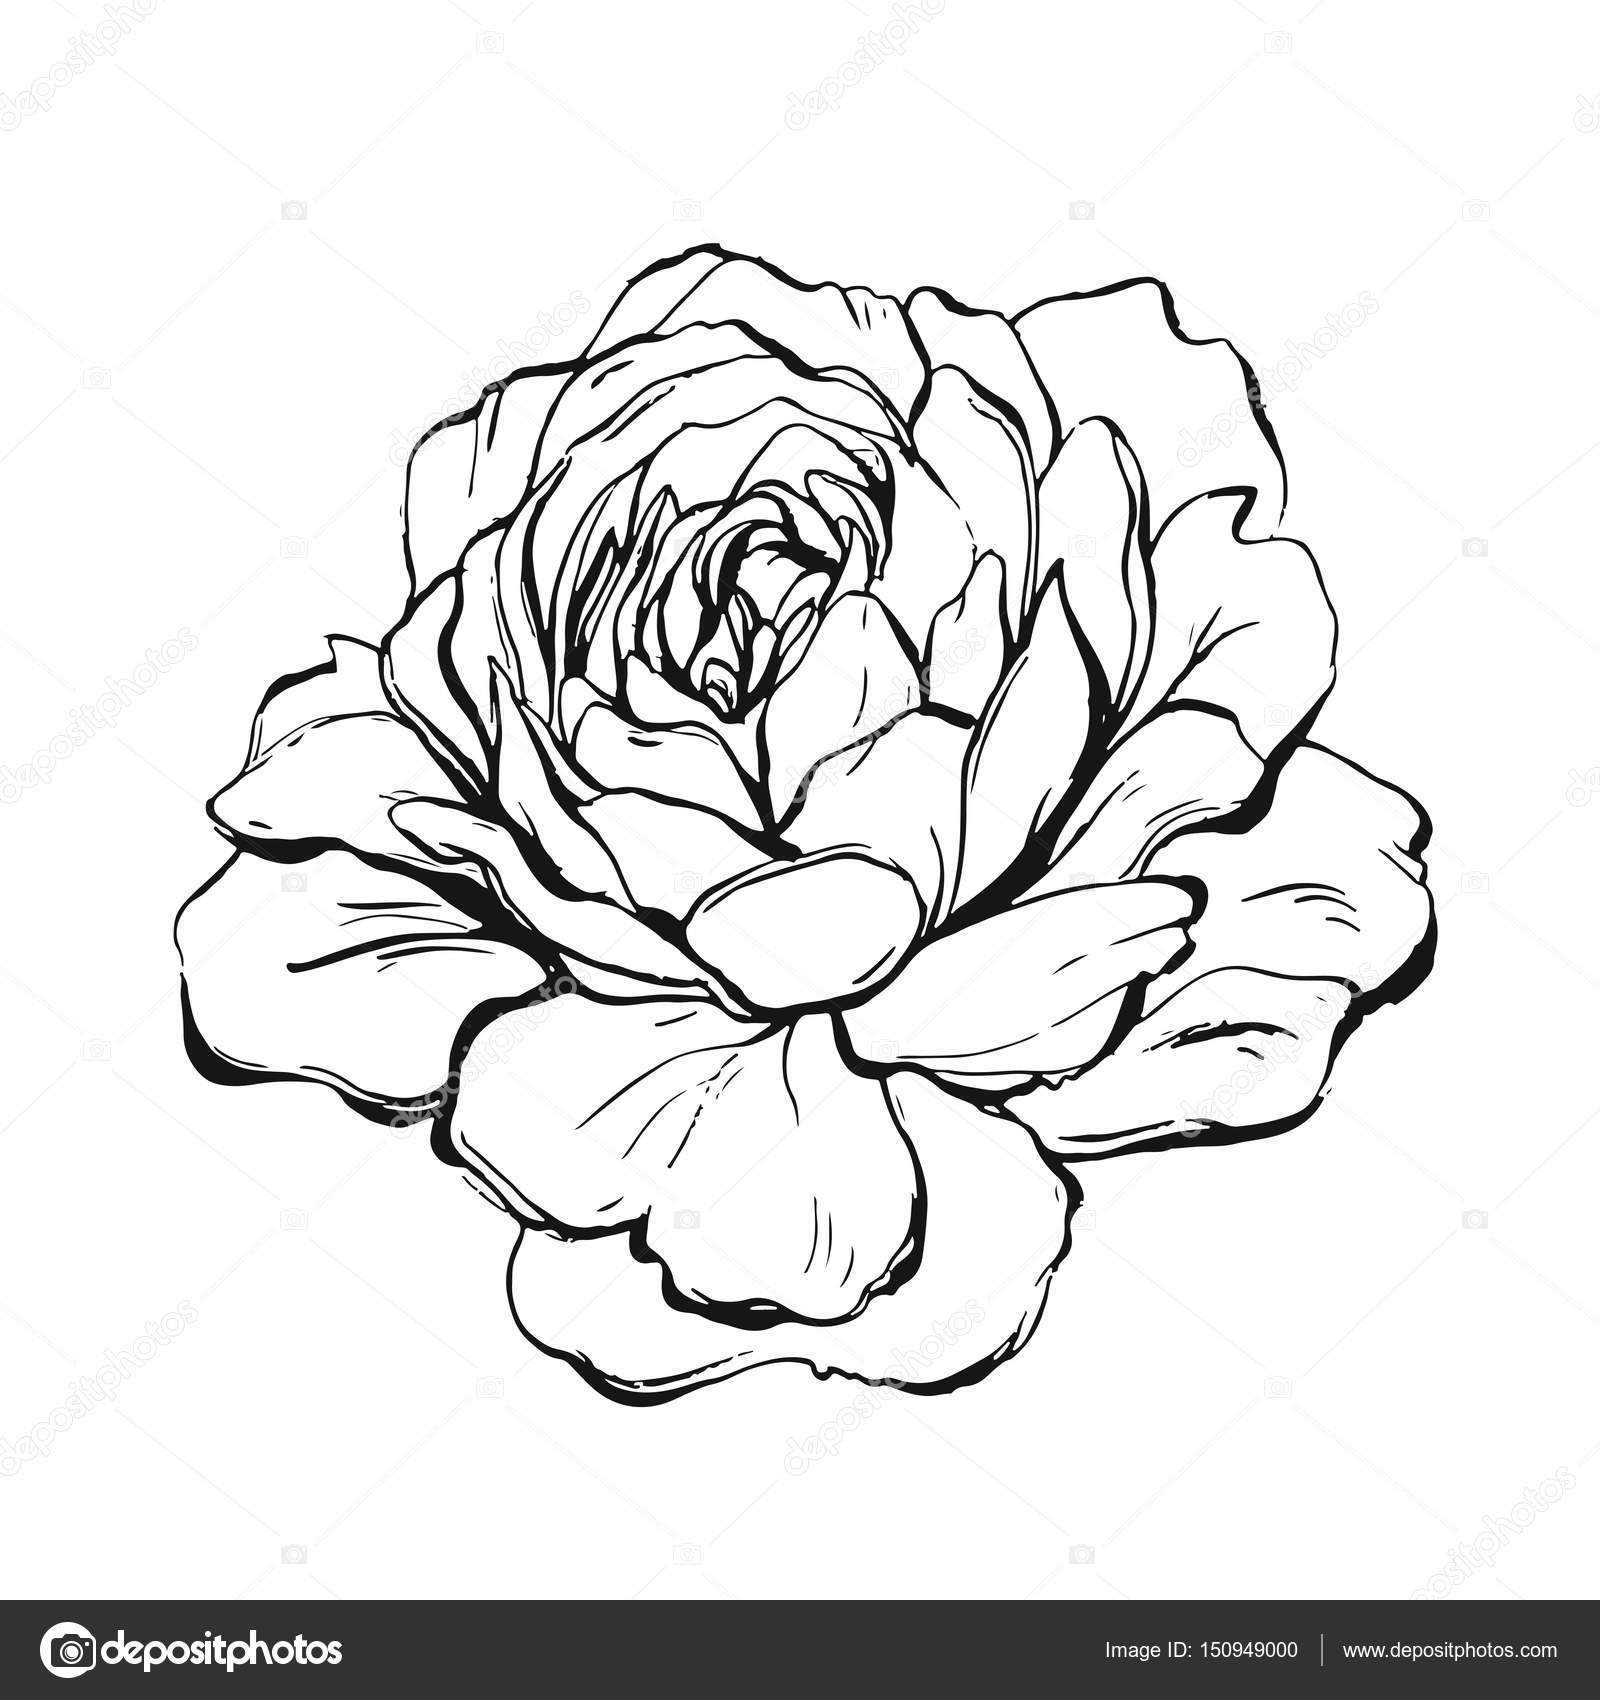 Download Hand made vector abstract graphic ink peony or rose flower ...